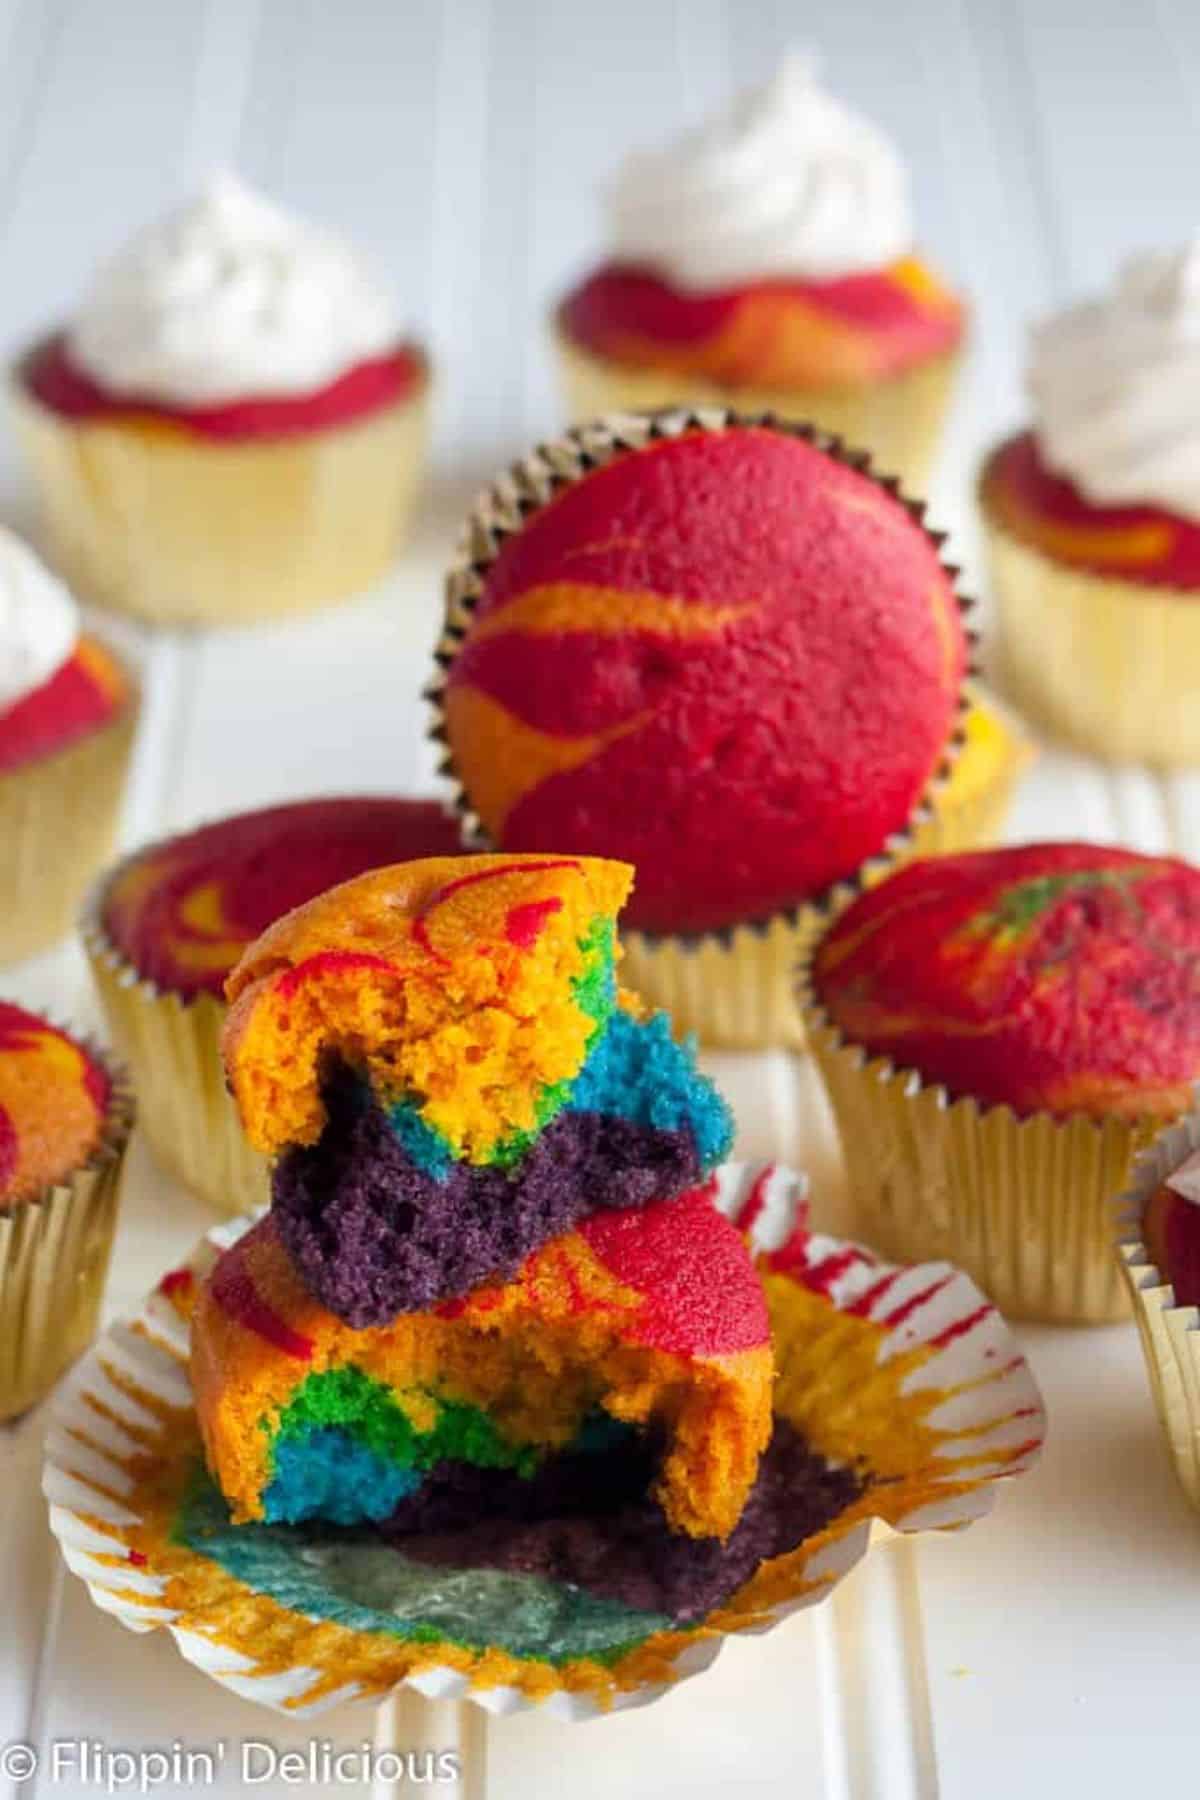 Mouth-watering Gluten-Free Rainbow Cupcakes o a wooden table.